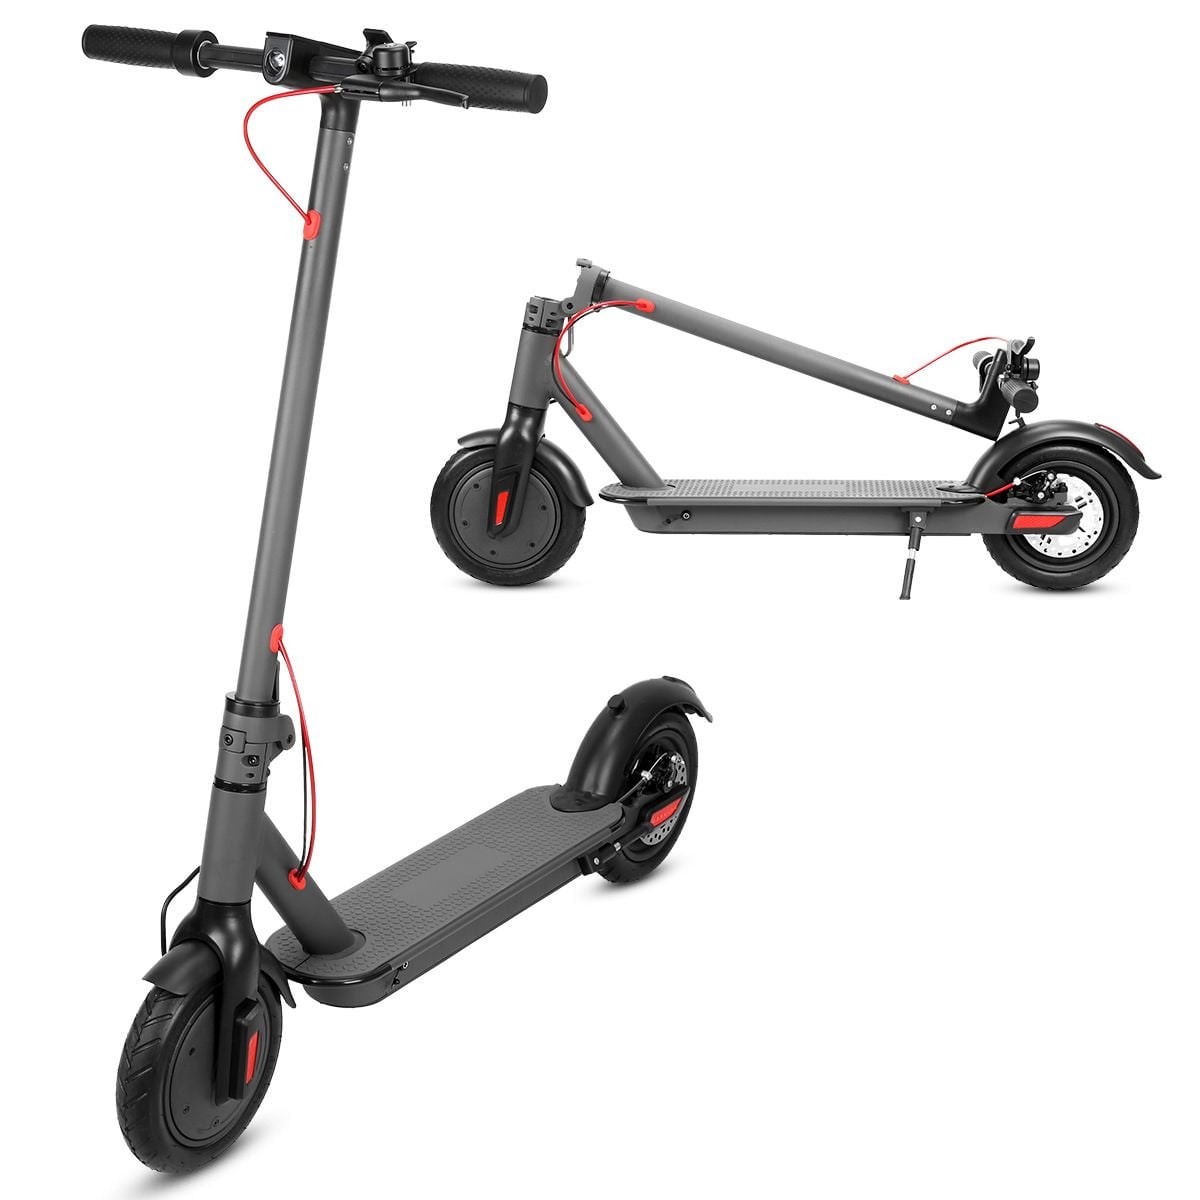 Powerful Scooter Battery /& Motor 350W Electric E-Scooter Foldable Lightweight Electric Scooter for Adults and Teenagers with Powerful Headlight